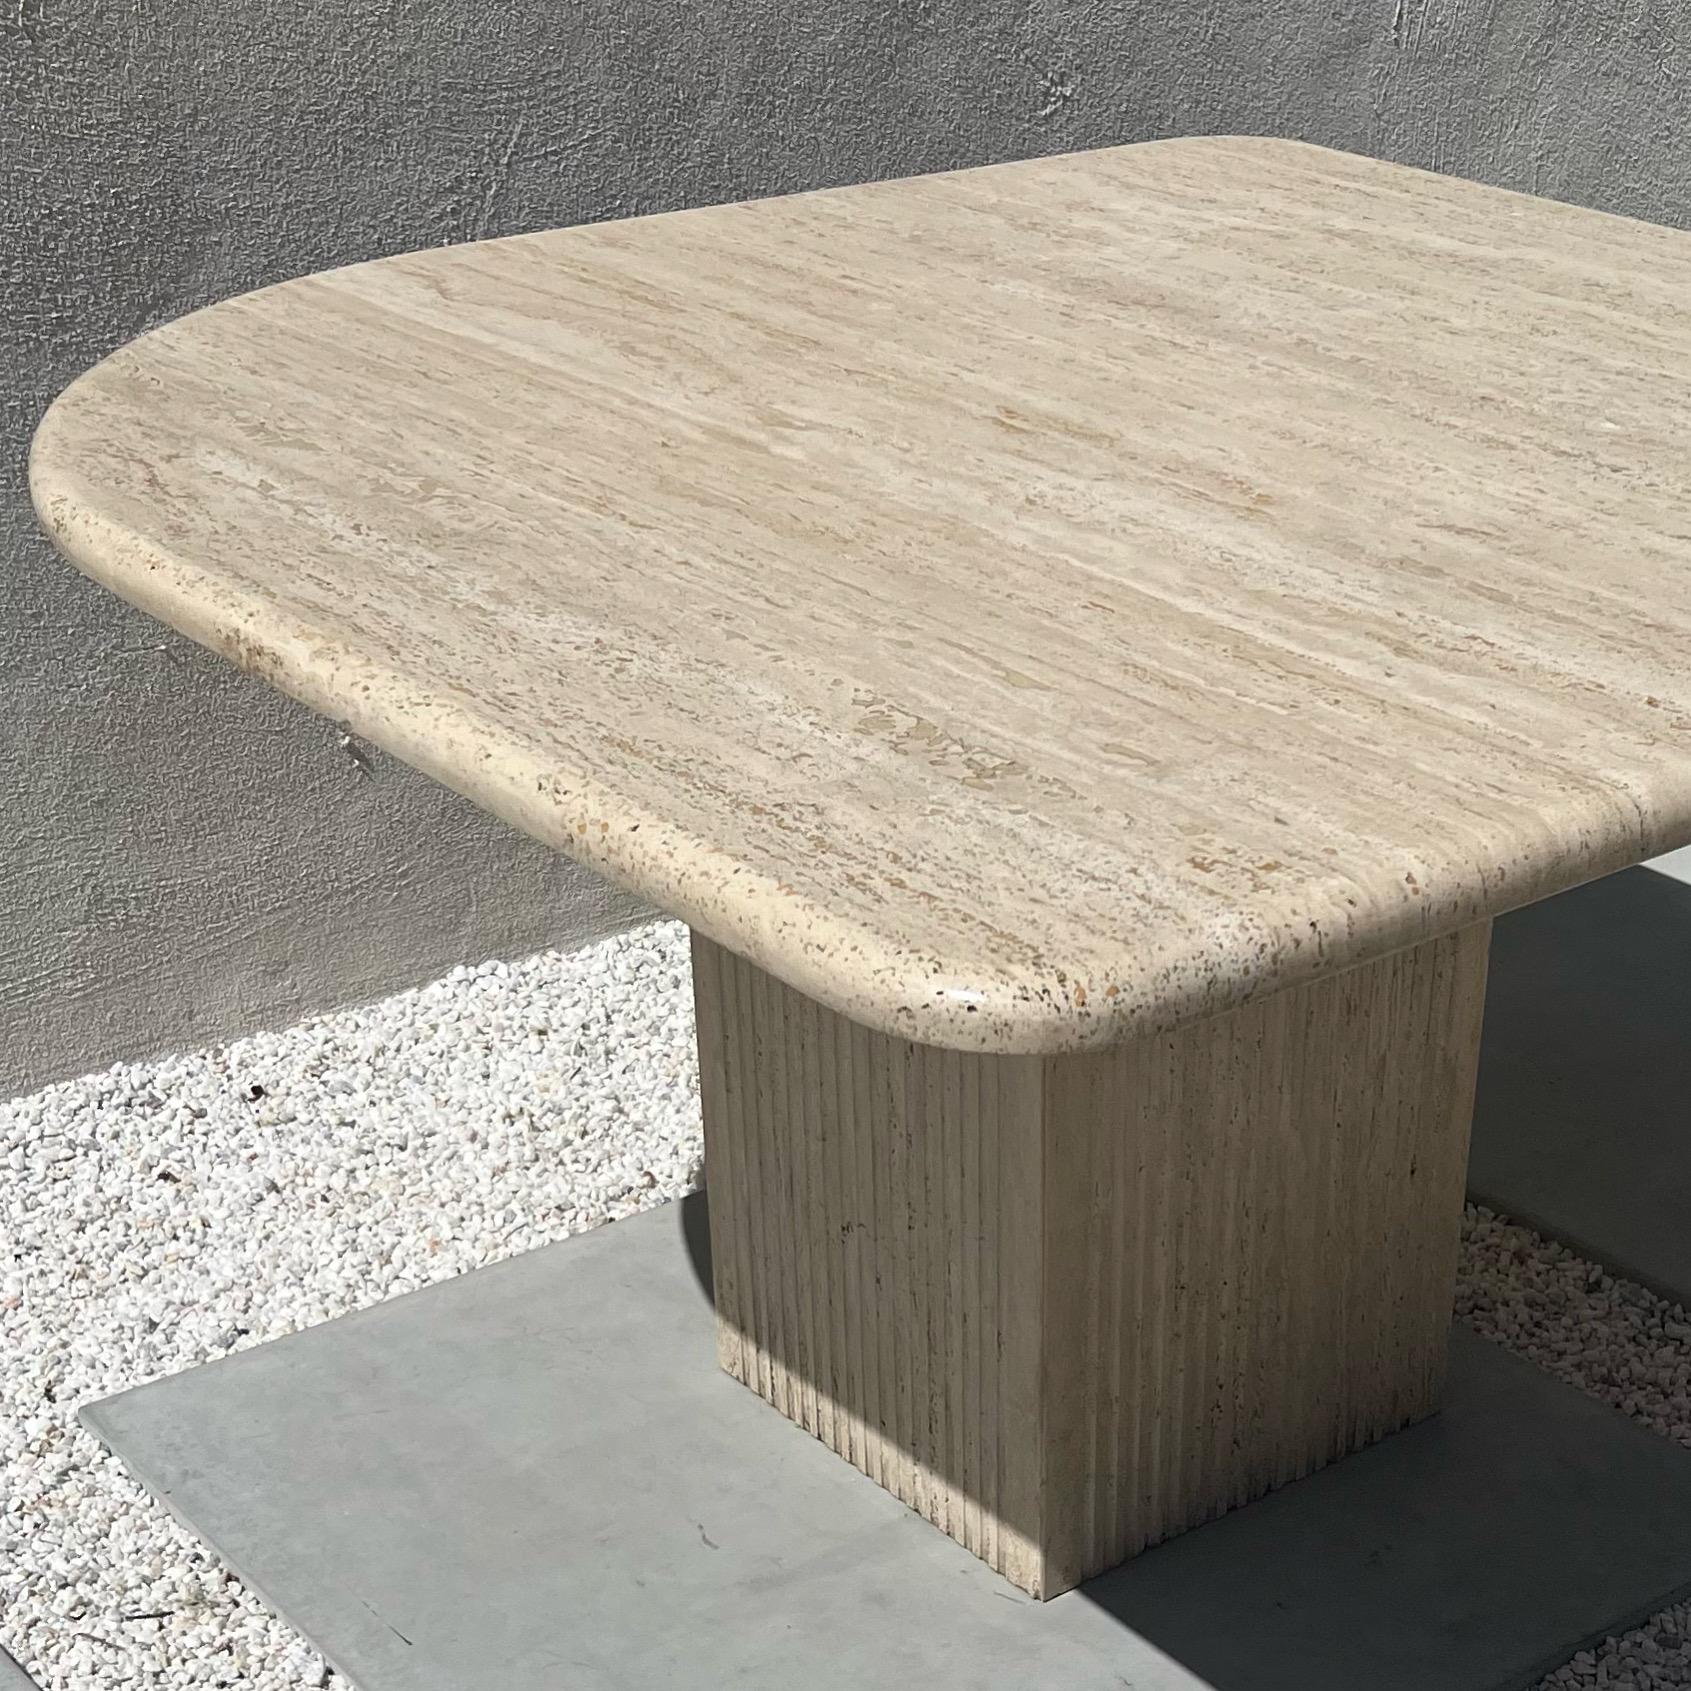 An extraordinarily rare eye-shaped travertine dining table with pleated pedestal base, circa 1970. Made in Italy of glorious thick, raw travertine. Seats four spaciously, and up go eight (albeit a bit squished!). I believe this is the original